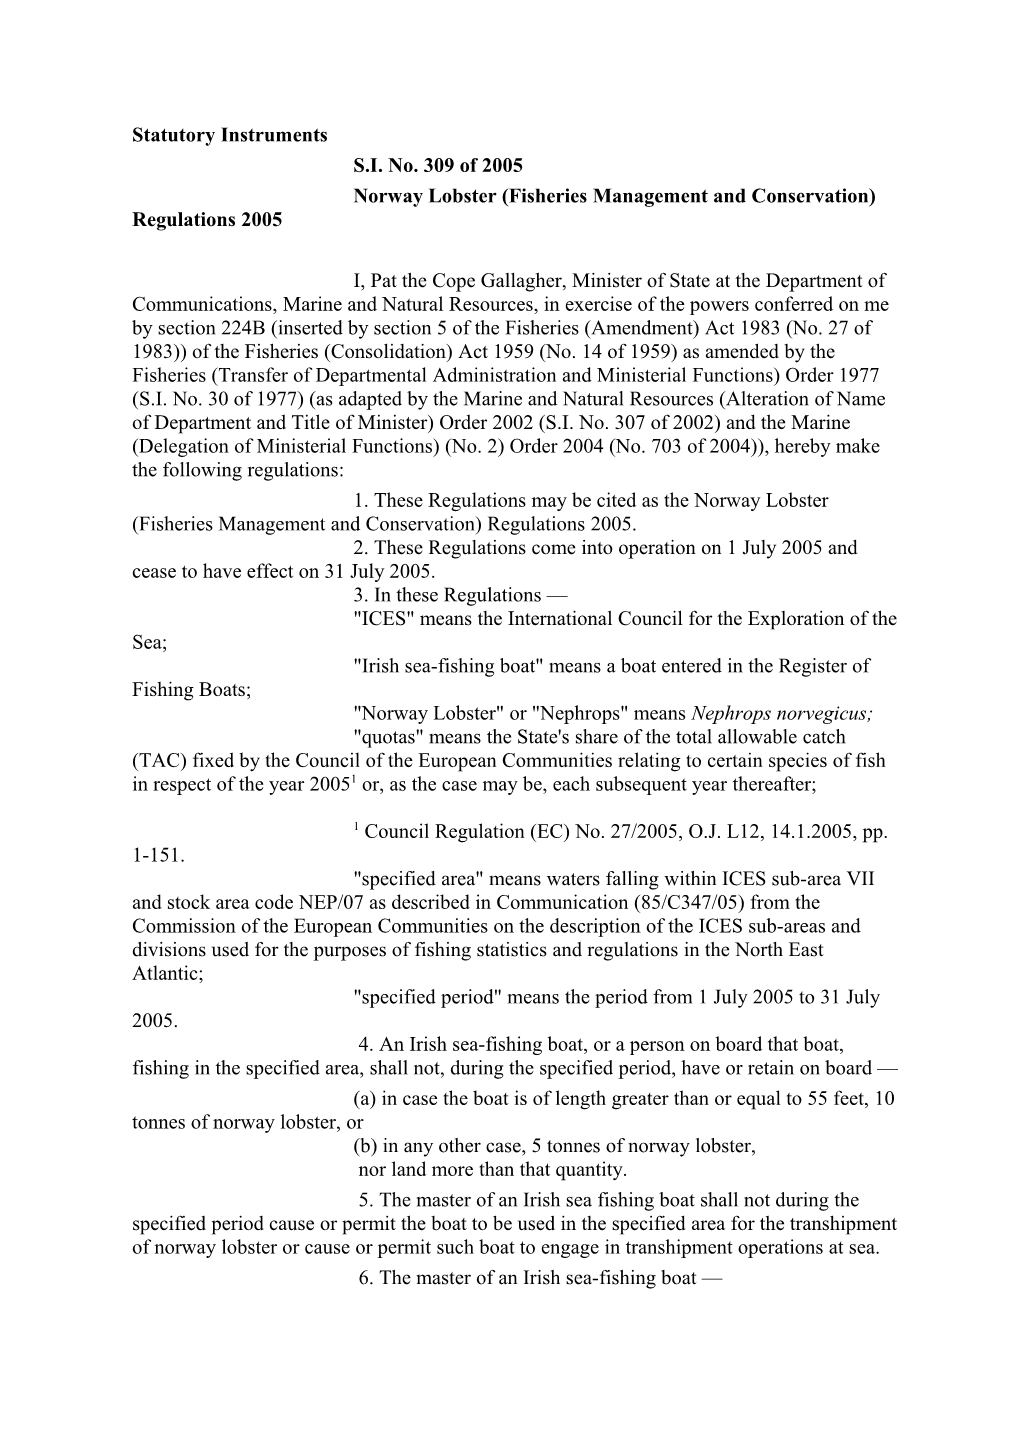 Norway Lobster (Fisheries Management and Conservation) Regulations 2005